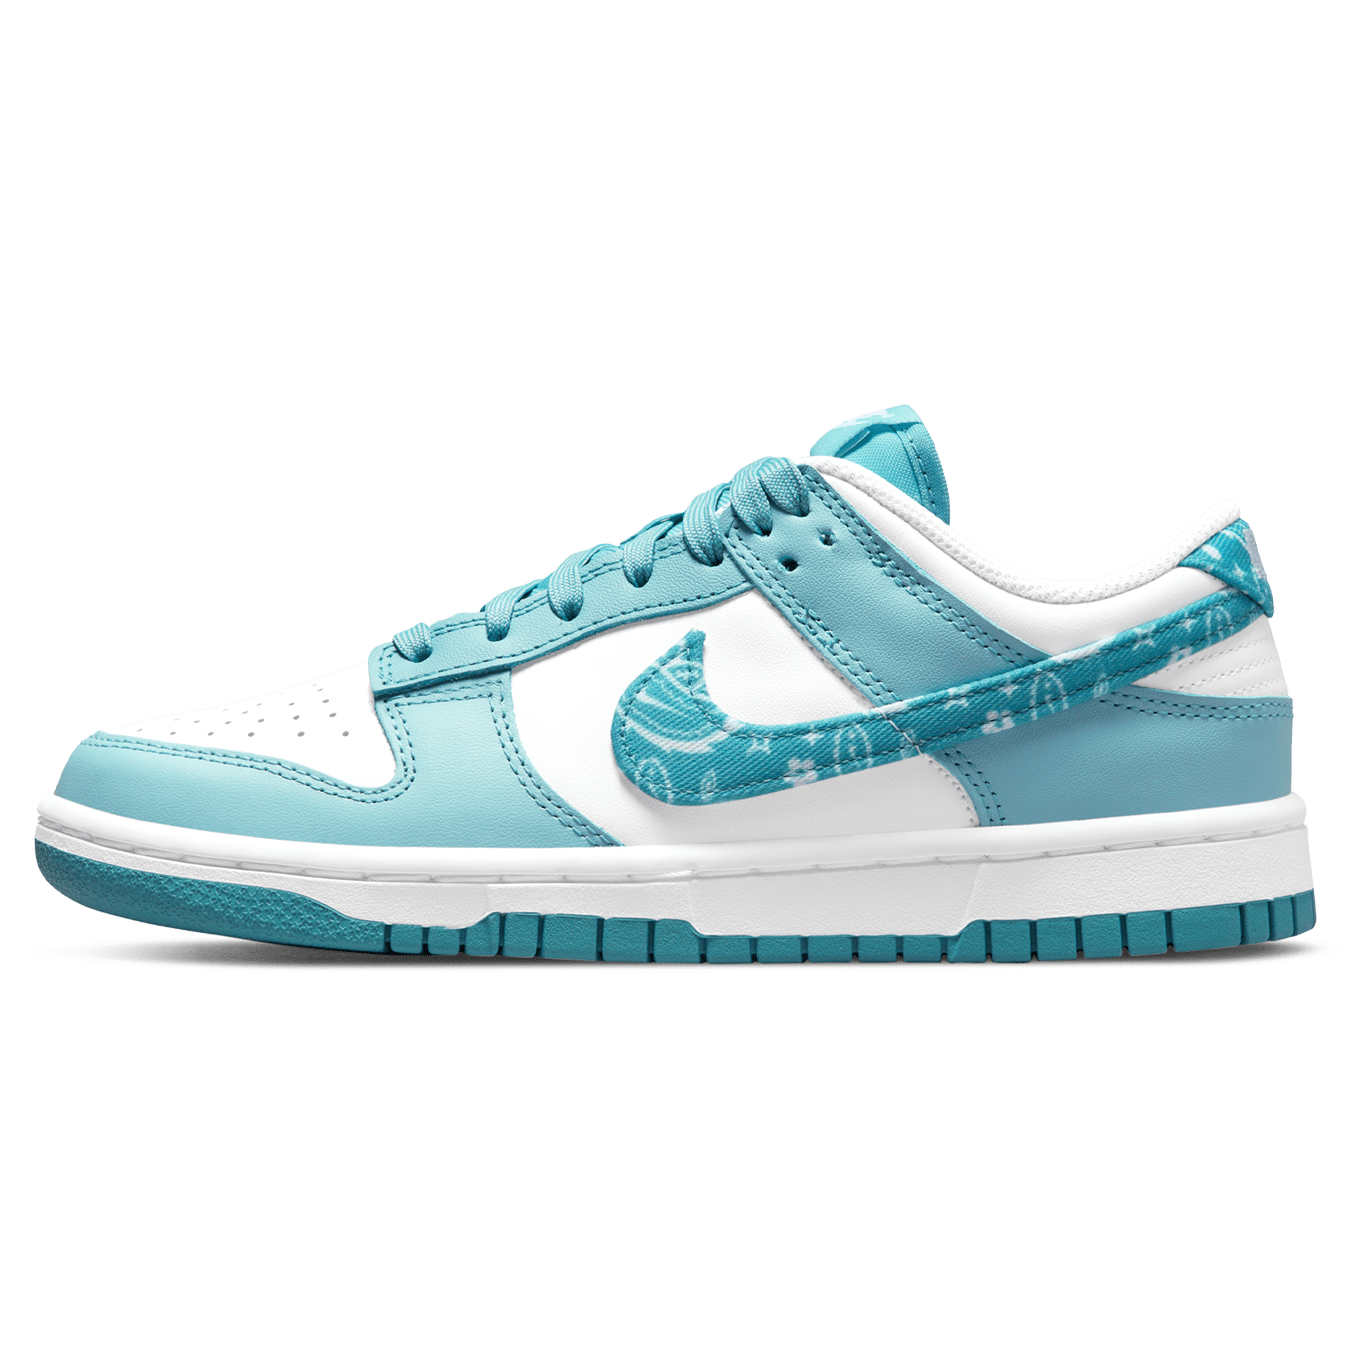 Nike Dunk Low Wmns Blue Paisley DH4401 101